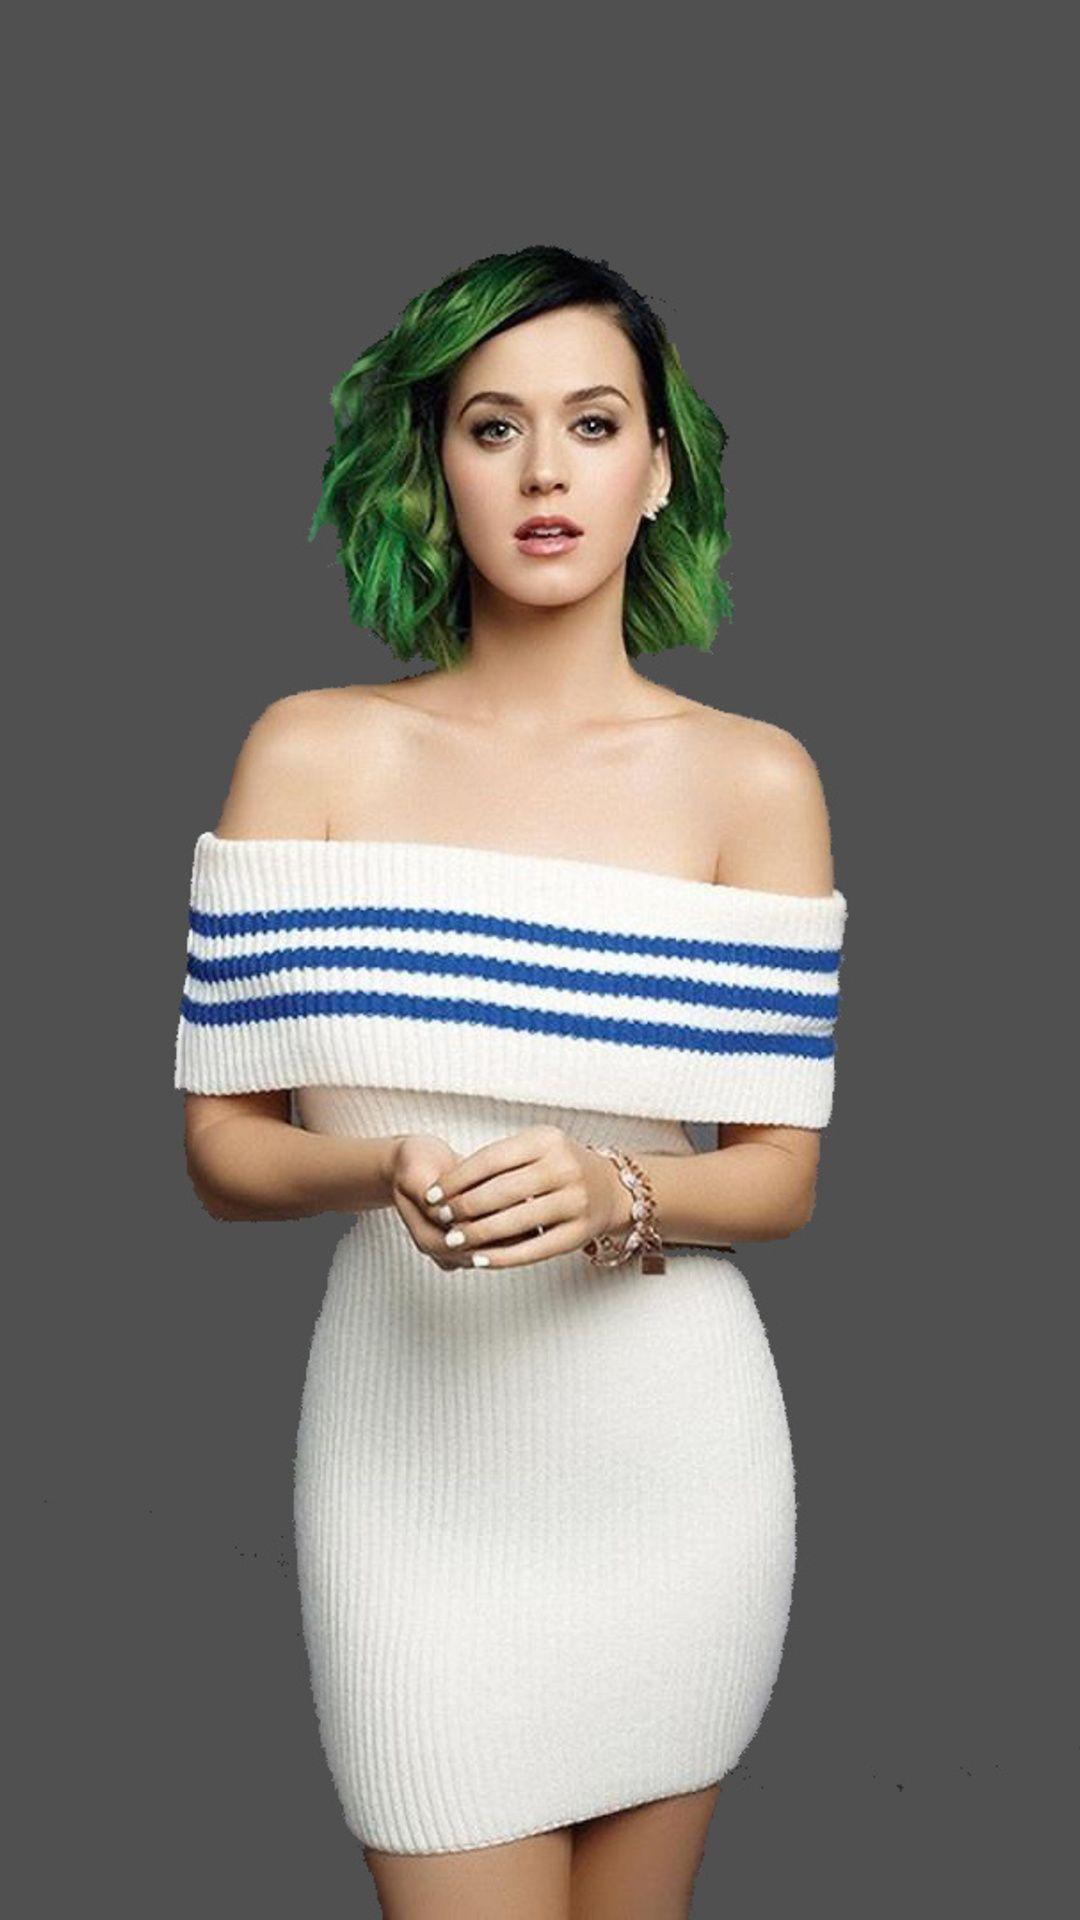 Katy Perry 2018 iPhone Wallpapers - Top Free Katy Perry 2018 iPhone ...